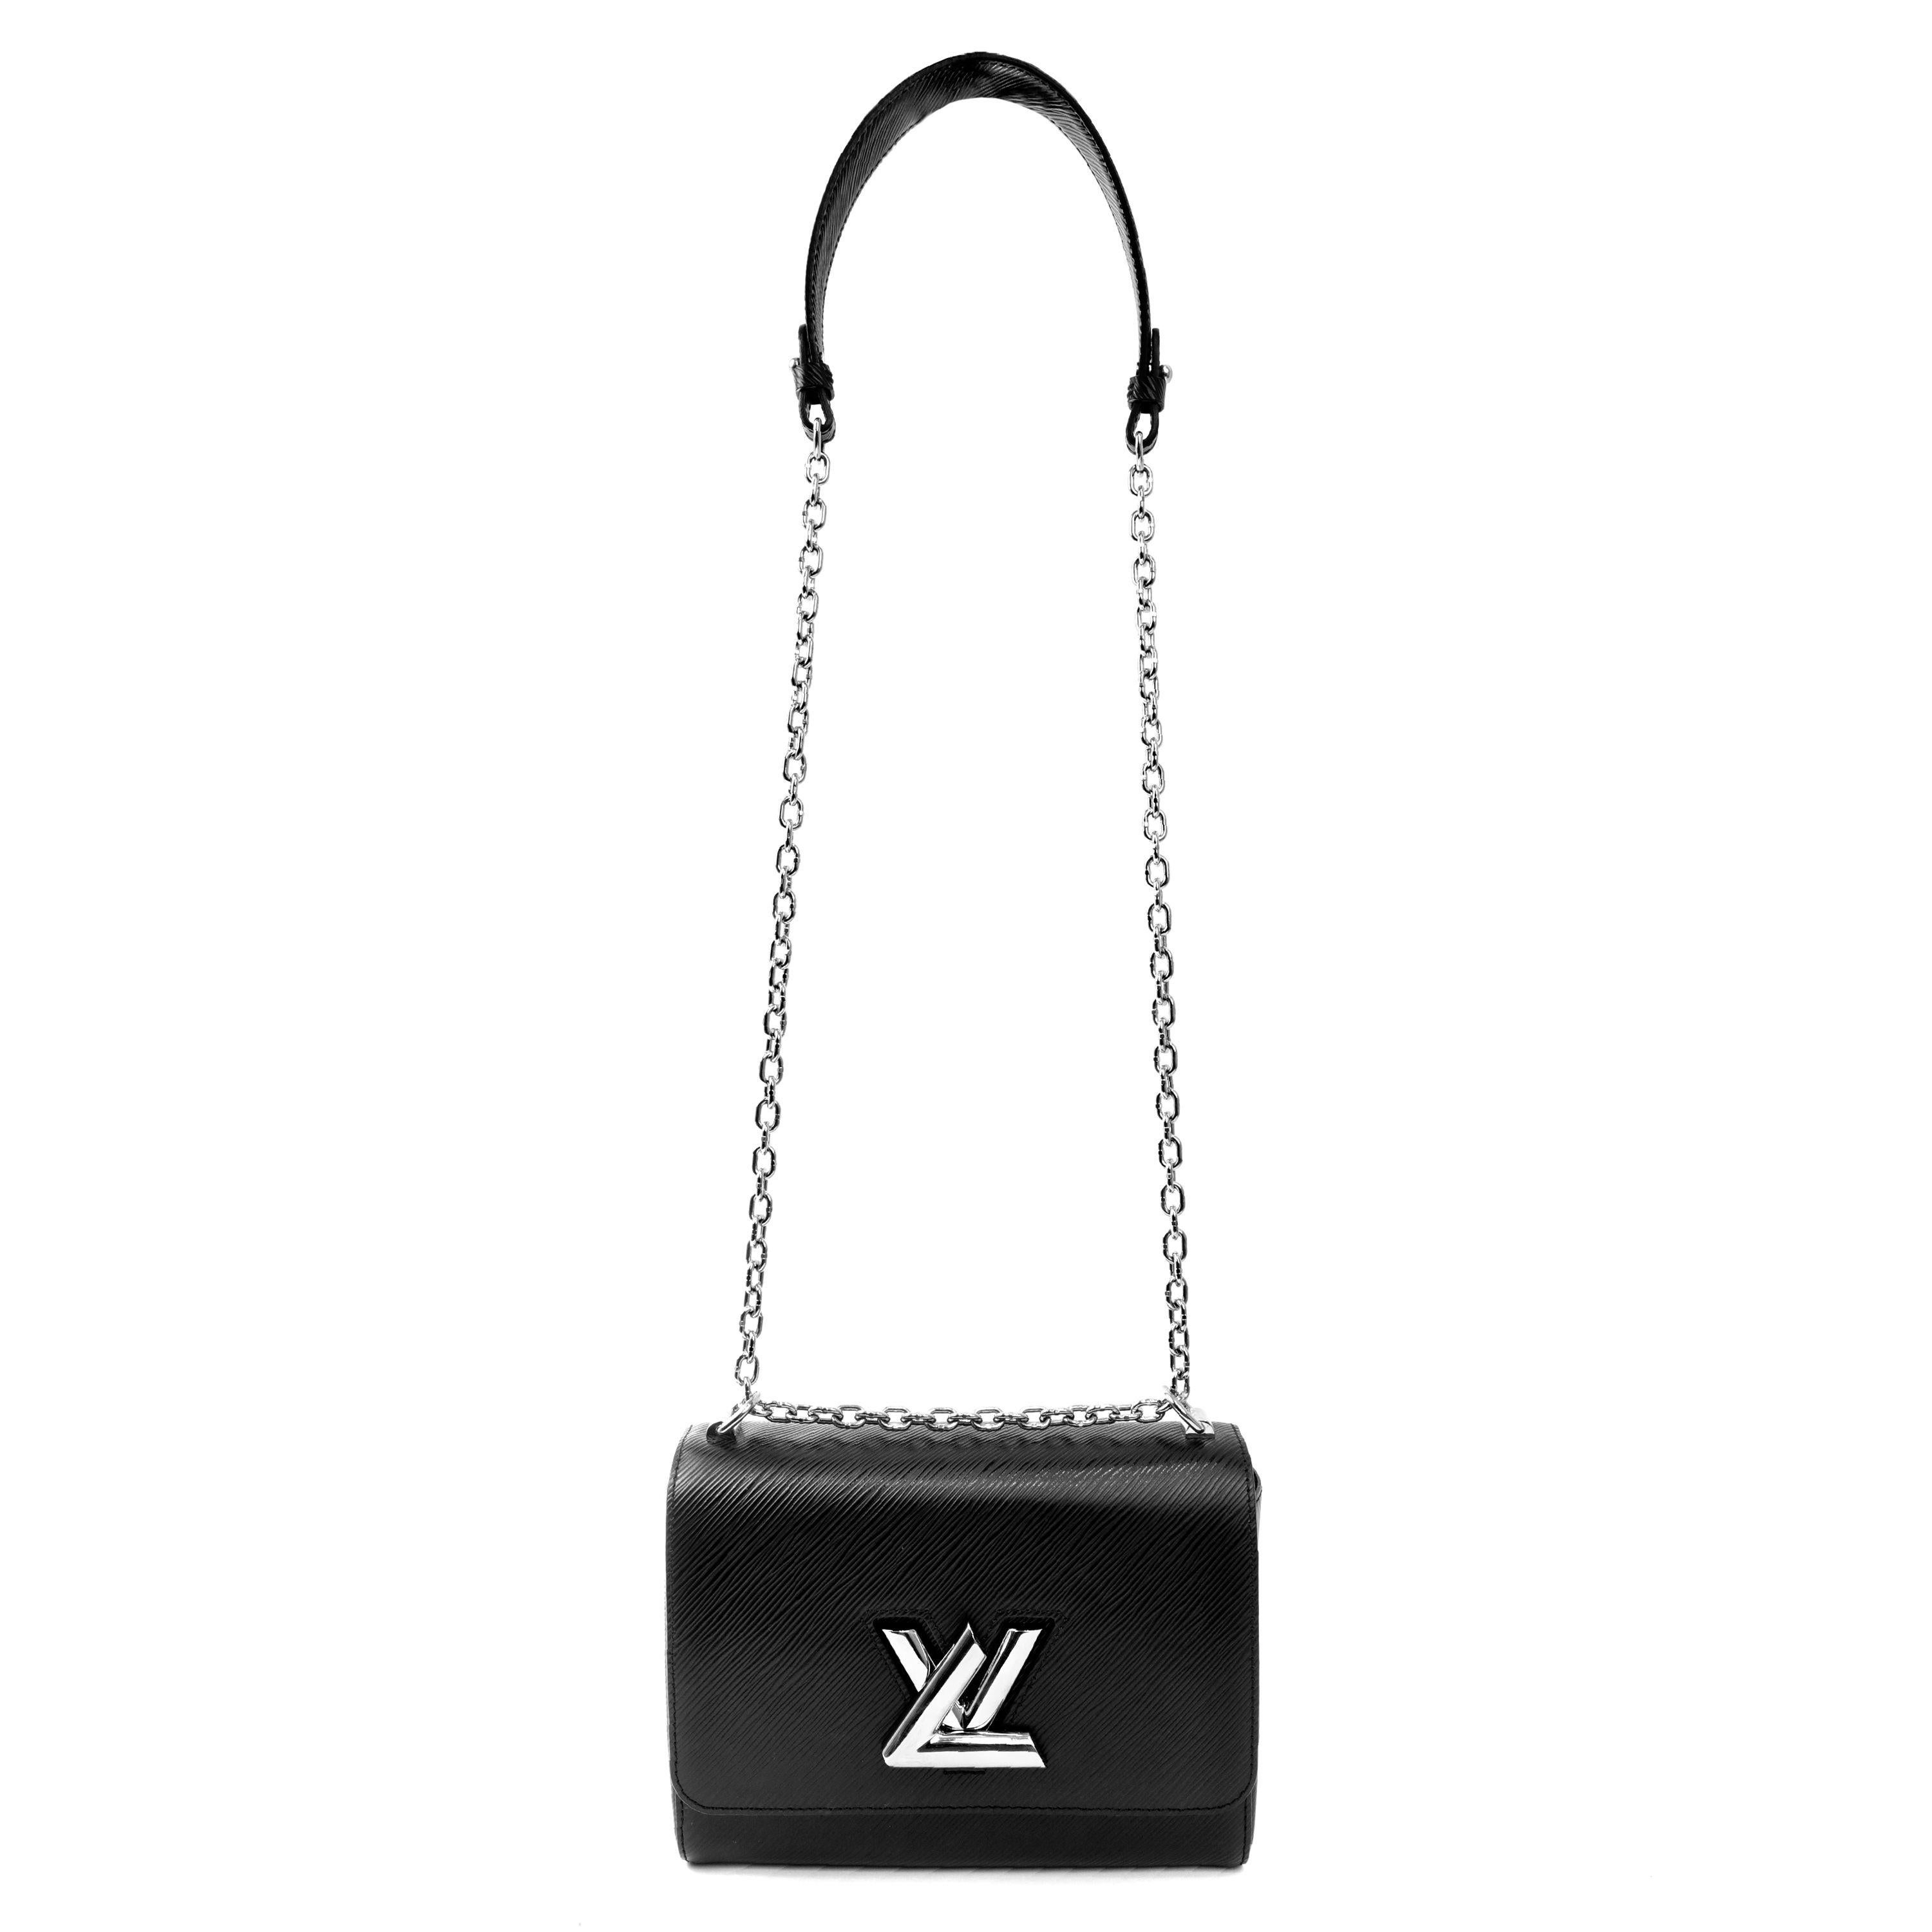 Louis Vuitton Black Epi Twist MM Crossbody Bag with Silver Hardware In Good Condition For Sale In Palm Beach, FL